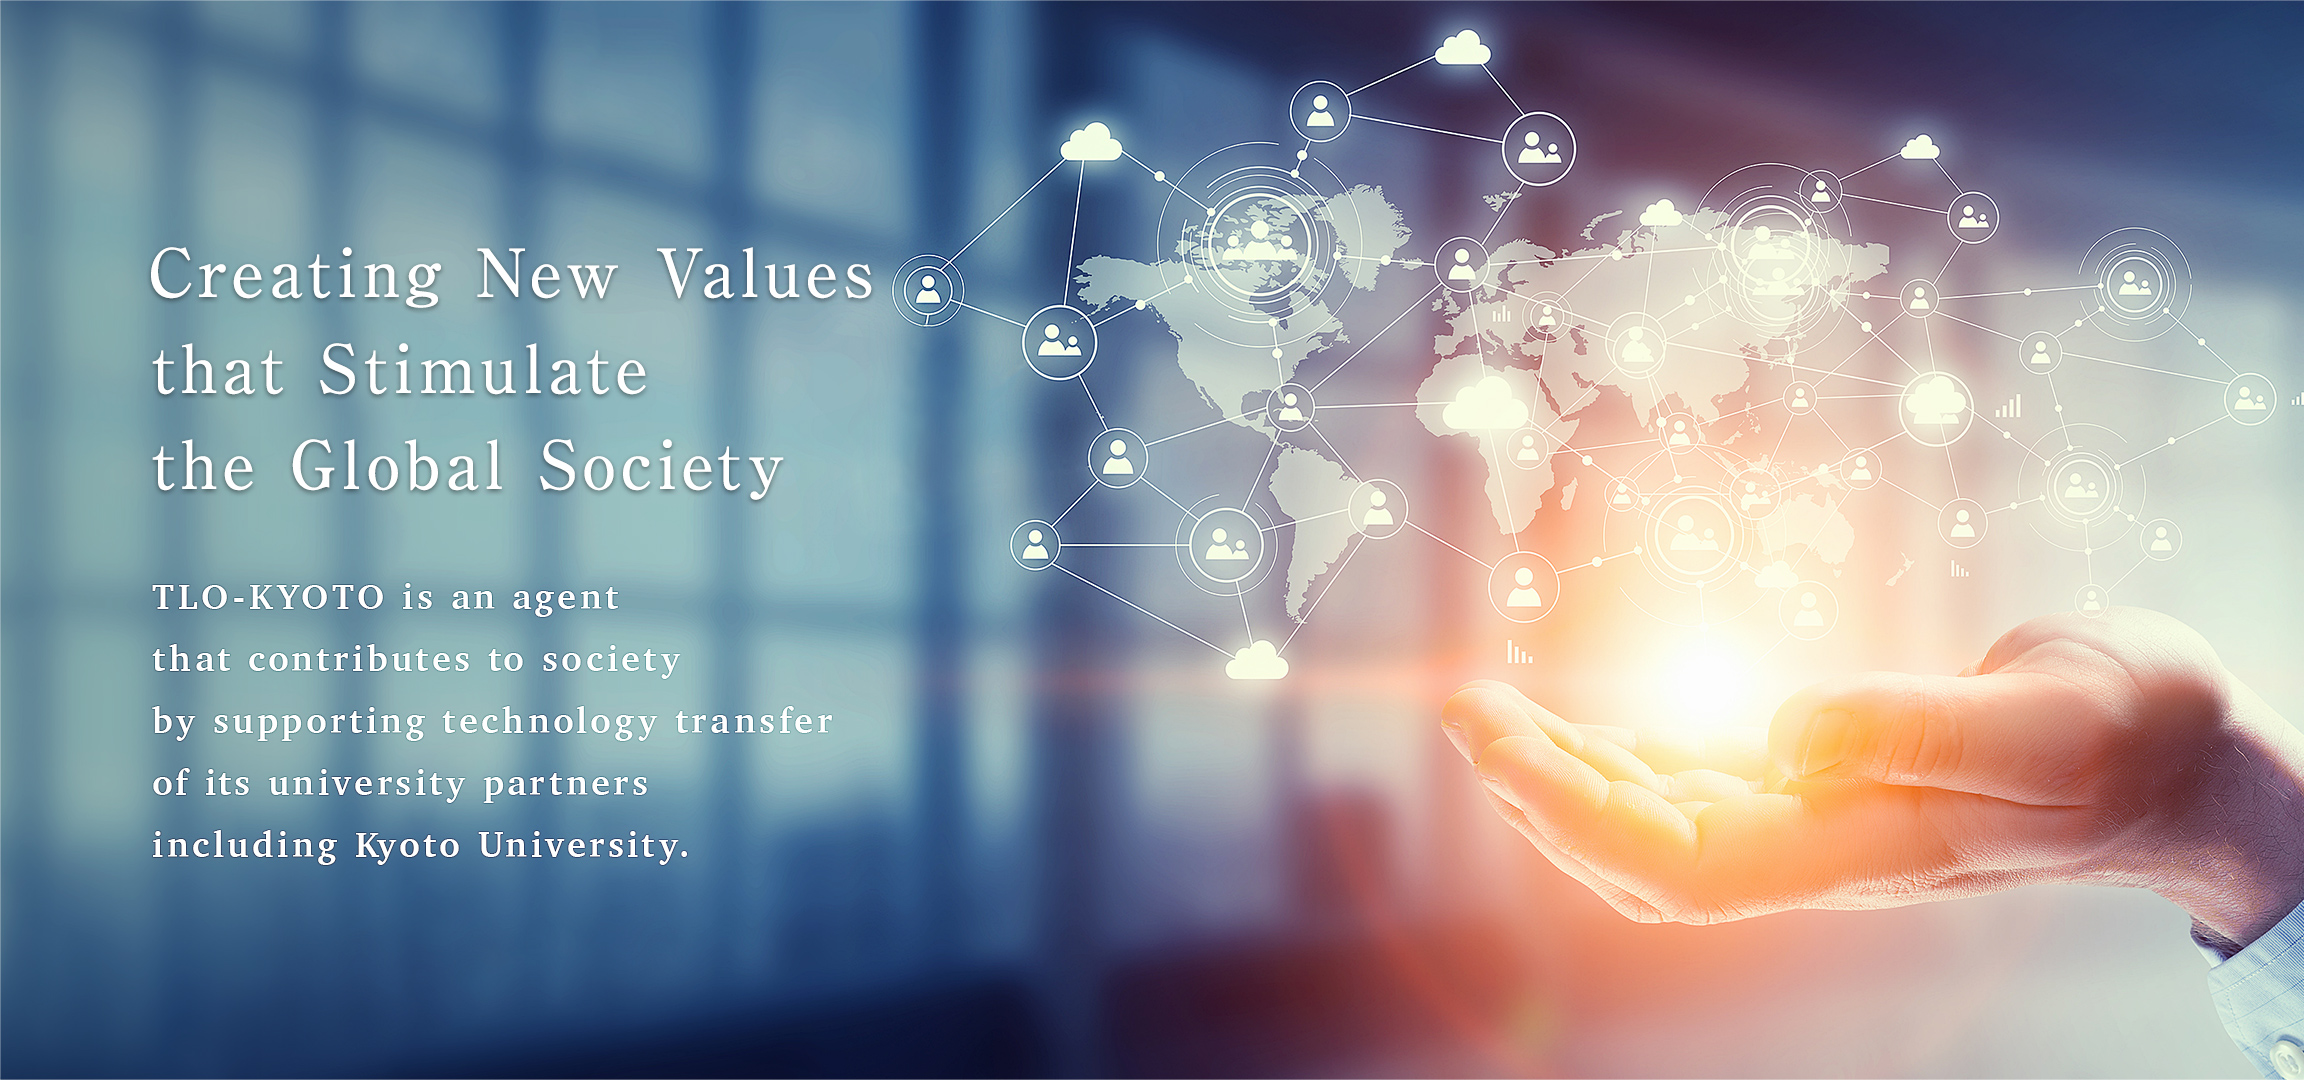 Creating New Values that Stimulate the Global Society